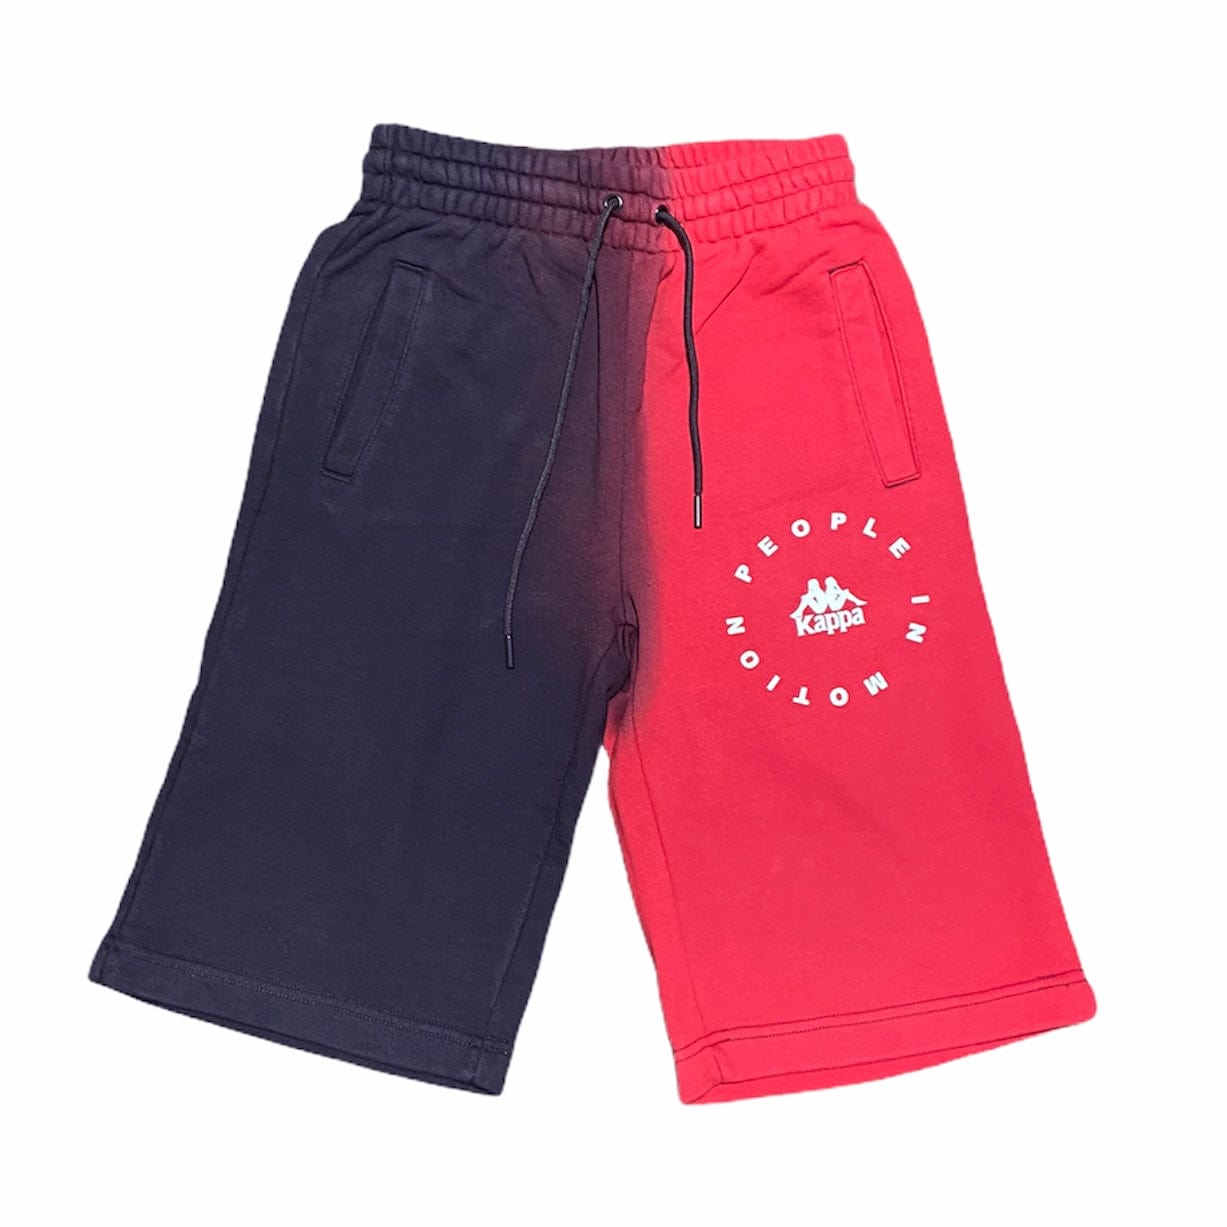 Kappa Authentic Berrie Shorts (Red/Blue/White) - 36161CW – City Man USA